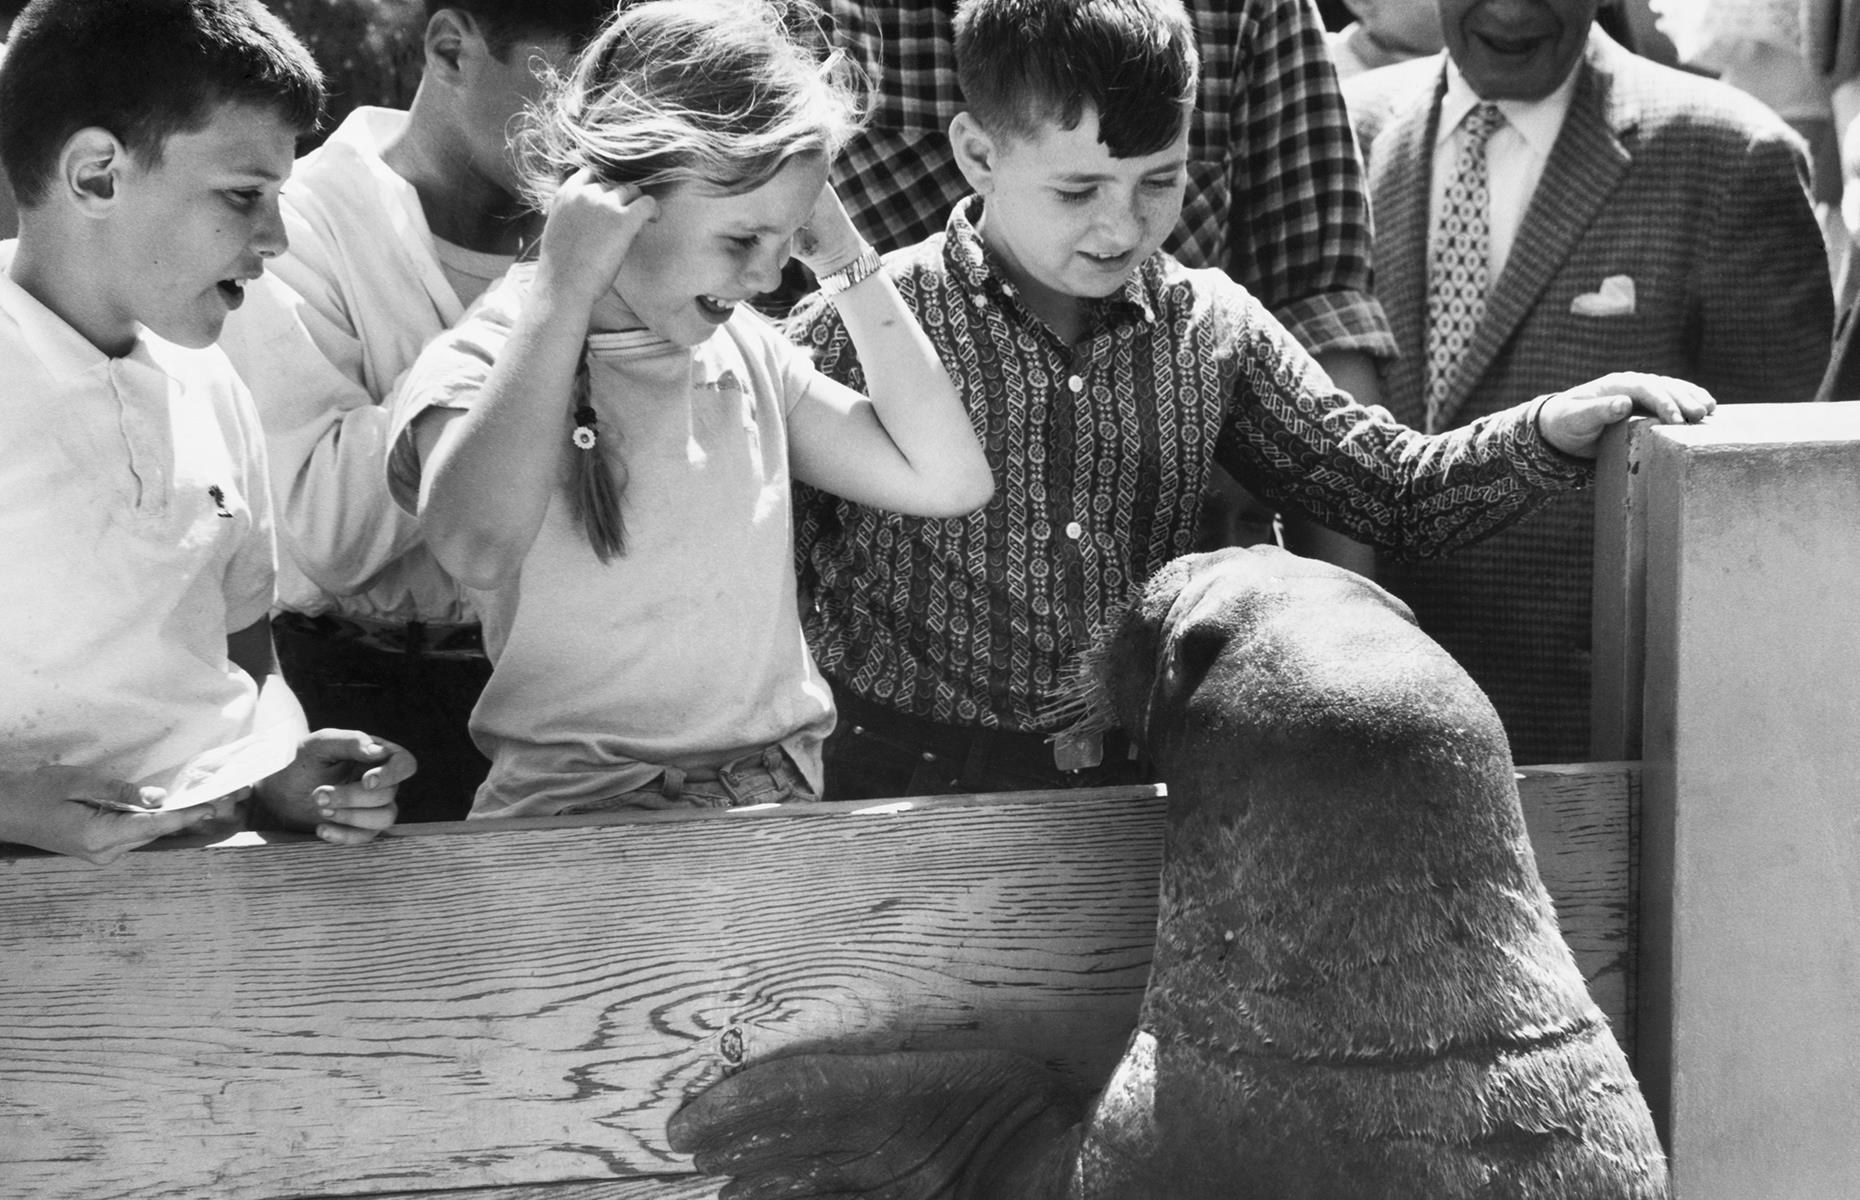 <p>In the 1950s, the New York Aquarium opened on Coney Island too, offering families even more reason to vacation here. This image shows a group of delighted children hanging out with a walrus named Ookie, a beloved resident at the aquarium who died in 1962.</p>  <p><strong><a href="https://www.loveexploring.com/galleries/93434/vintage-images-of-americas-most-historic-attractions?page=1">See more vintage images of America's most historic attractions</a></strong></p>